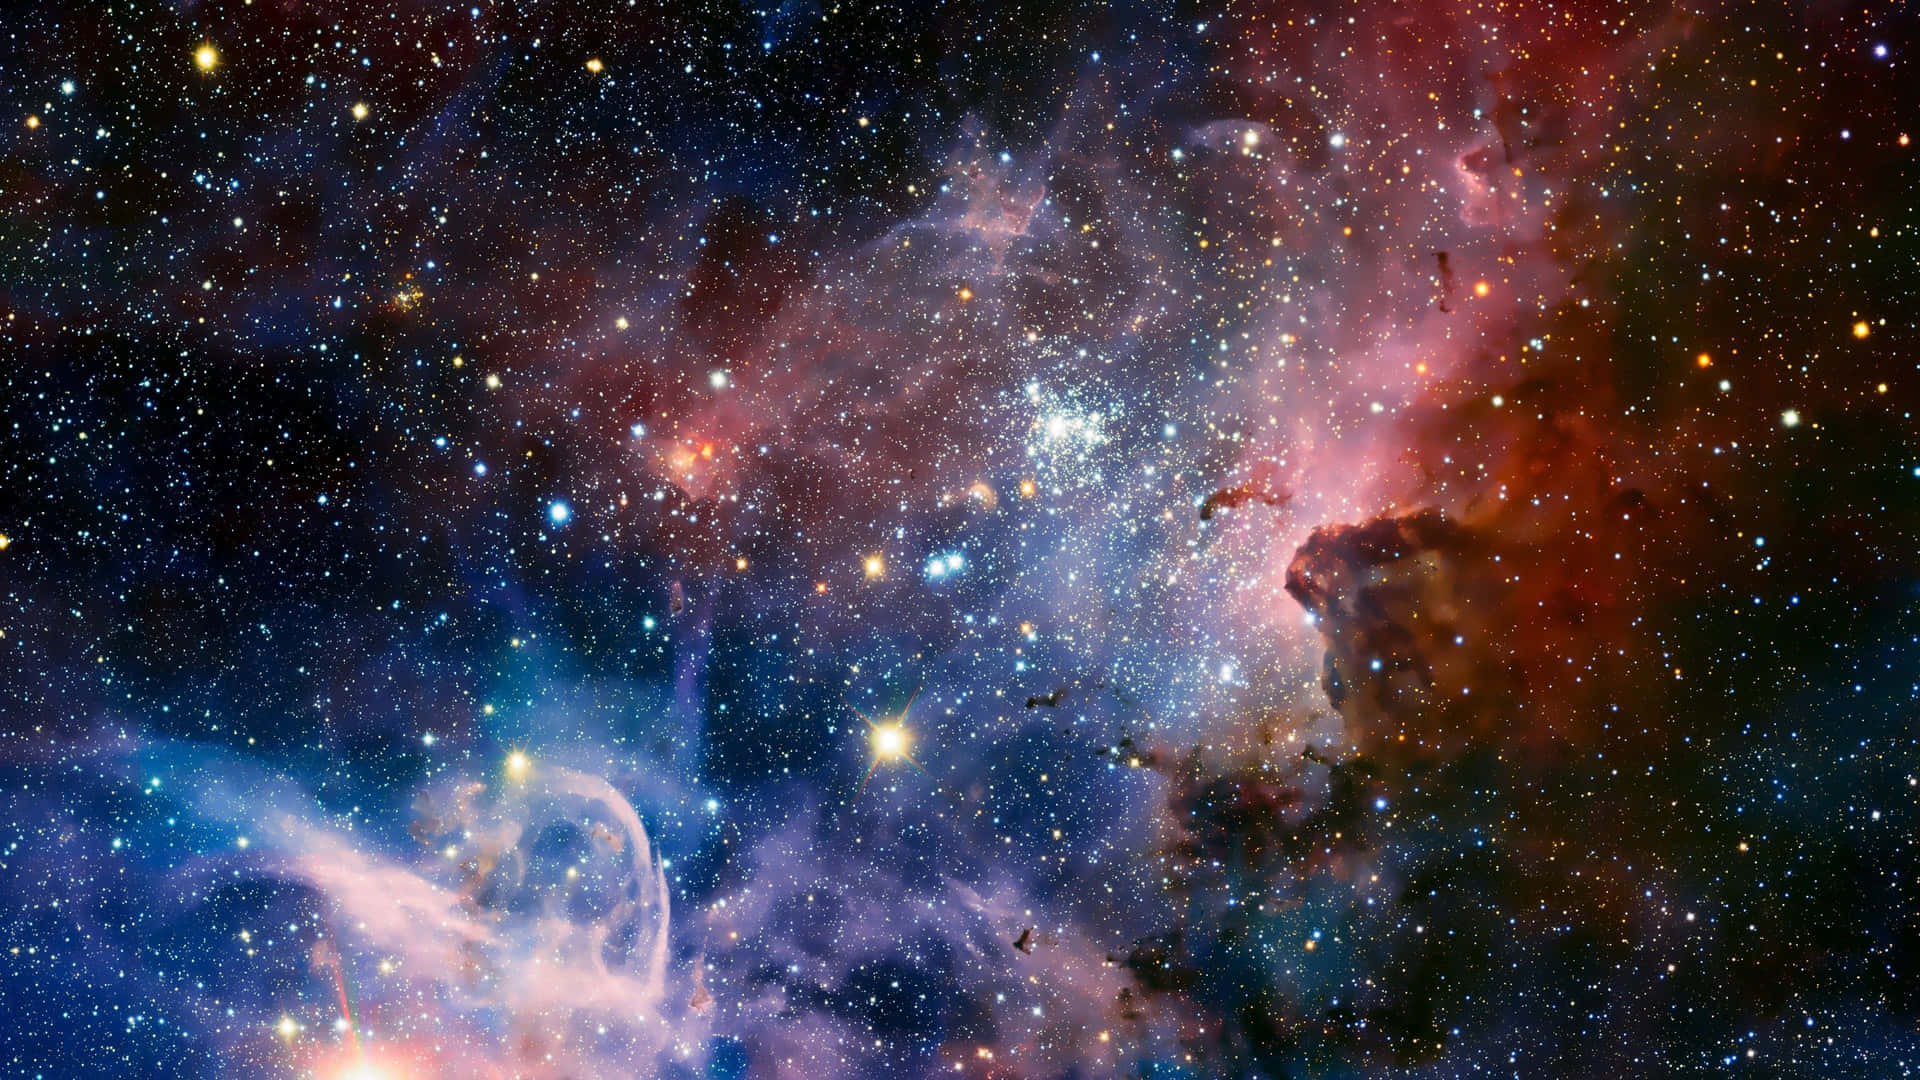 An awe-inspiring view of outer space